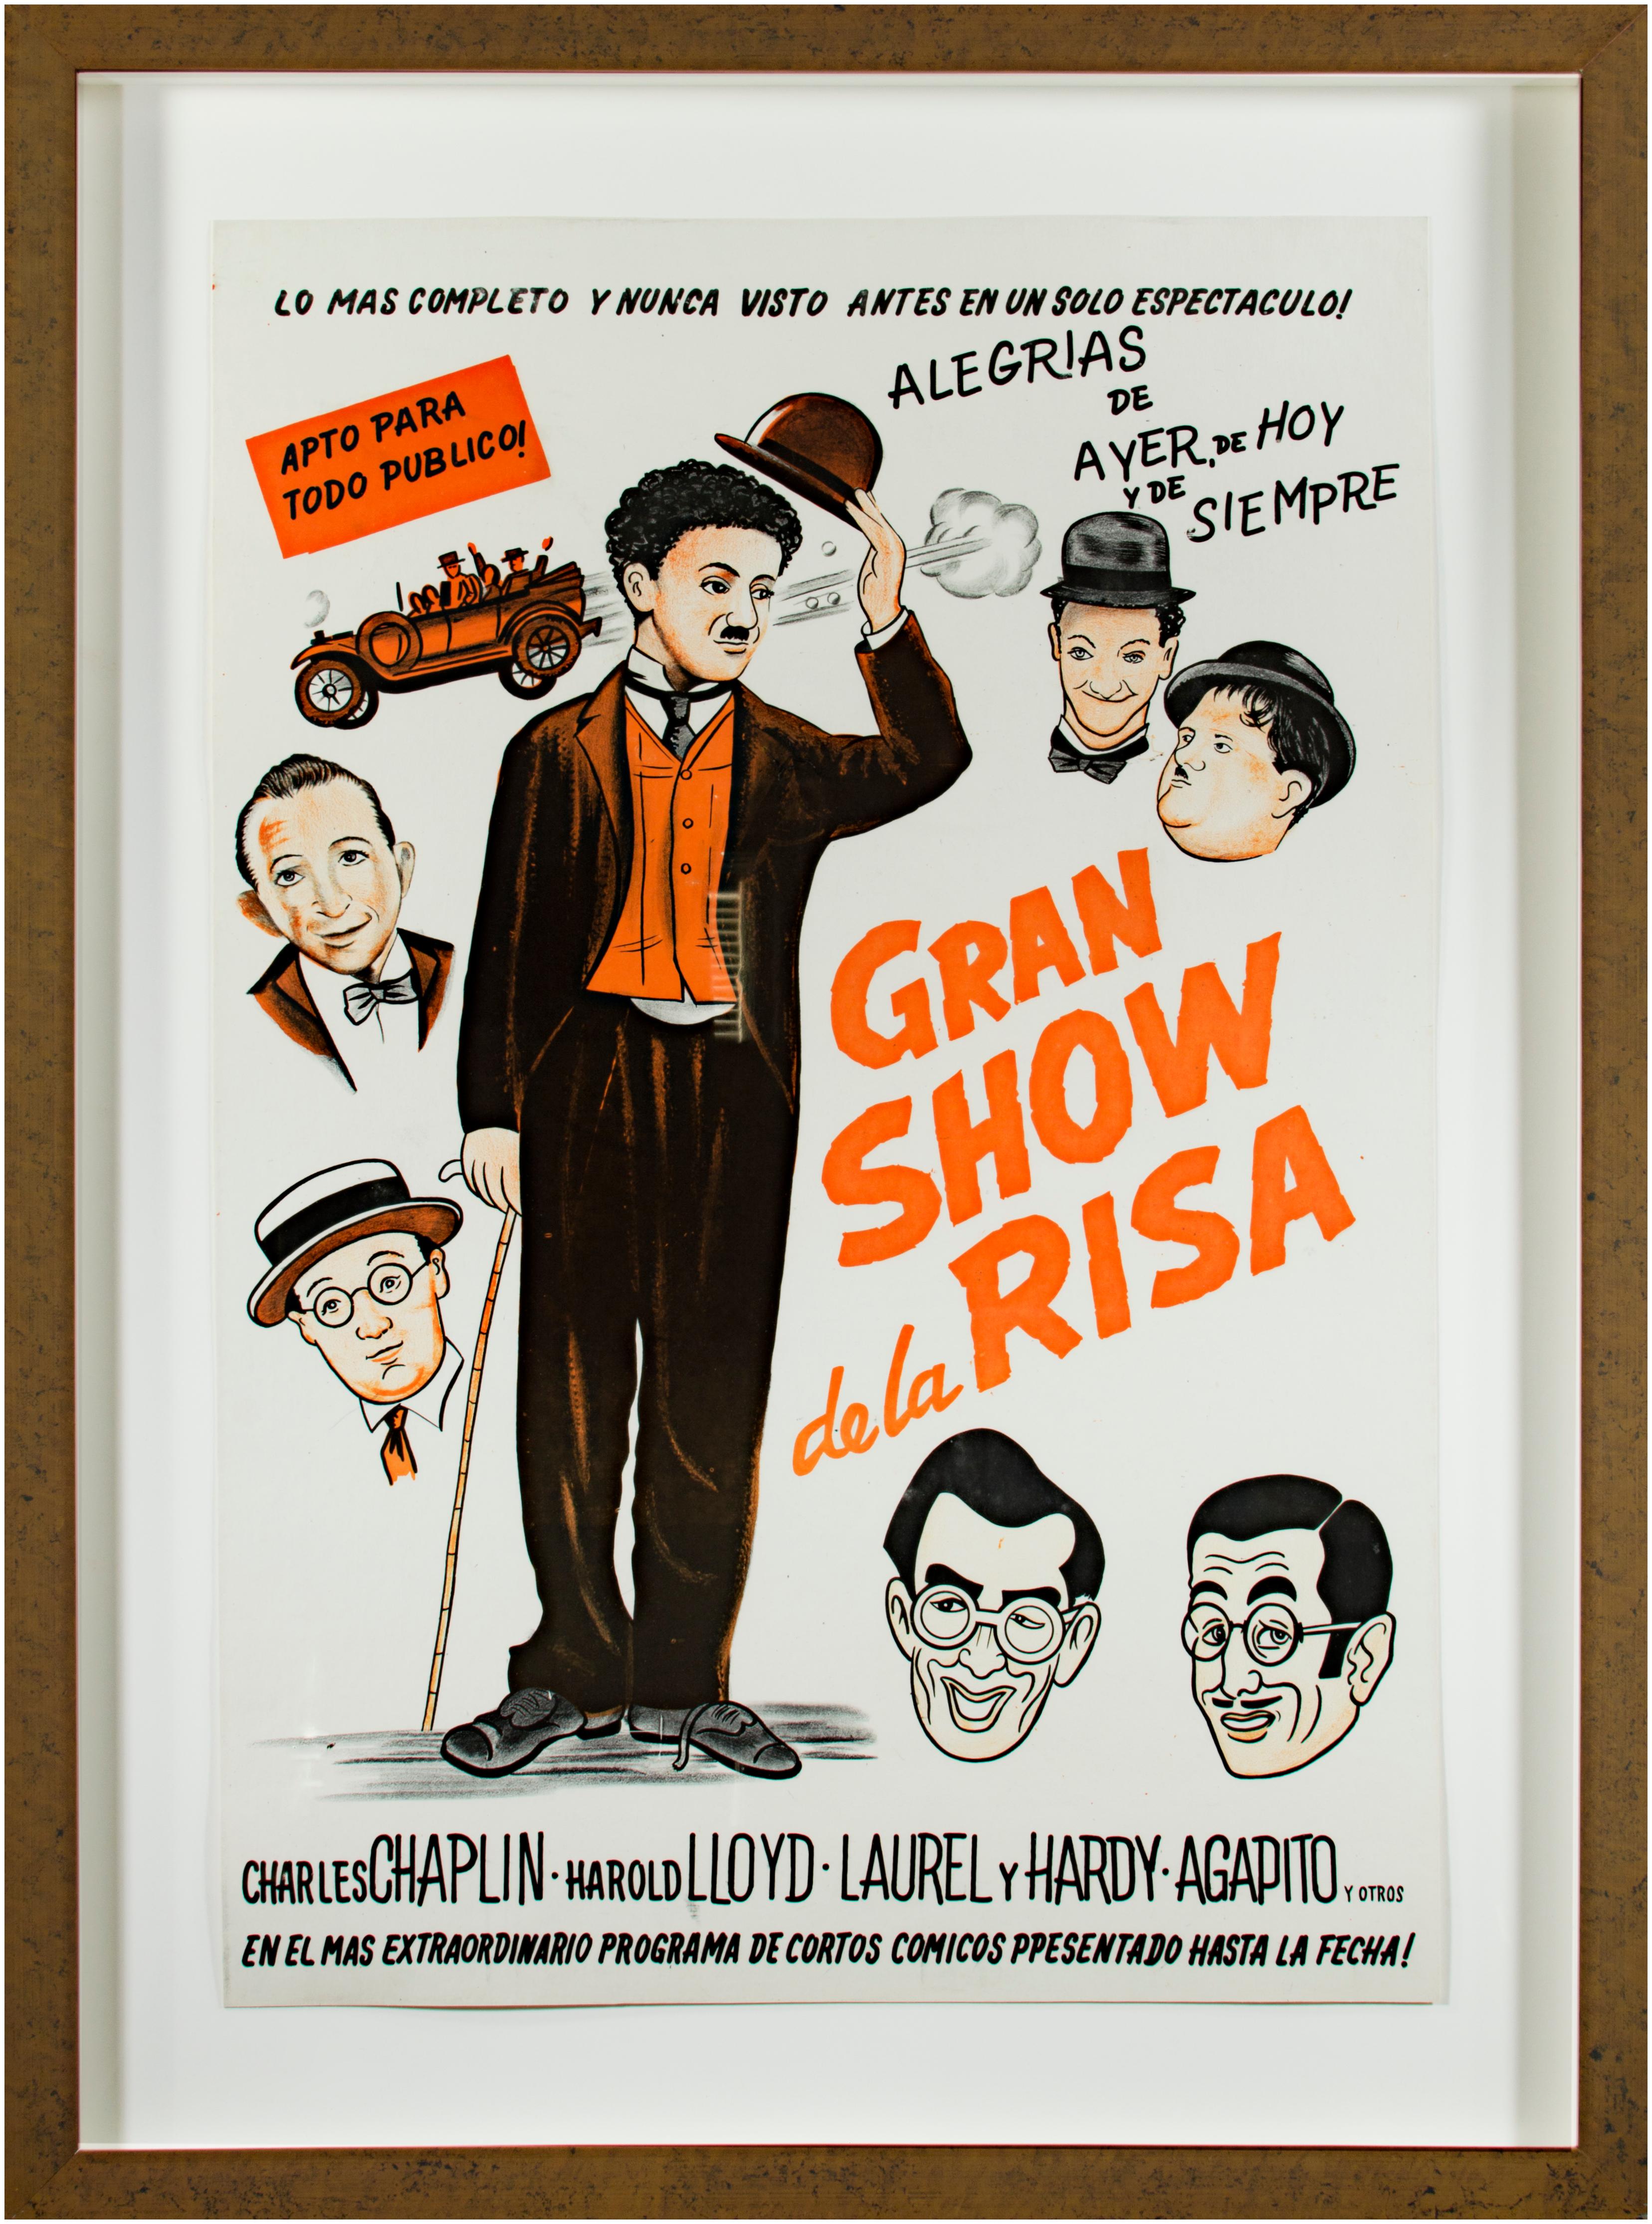 Unknown Figurative Print - Poster for "Gran Show de la Risa" with Charlie Chaplin, Harold Lloyd, and others